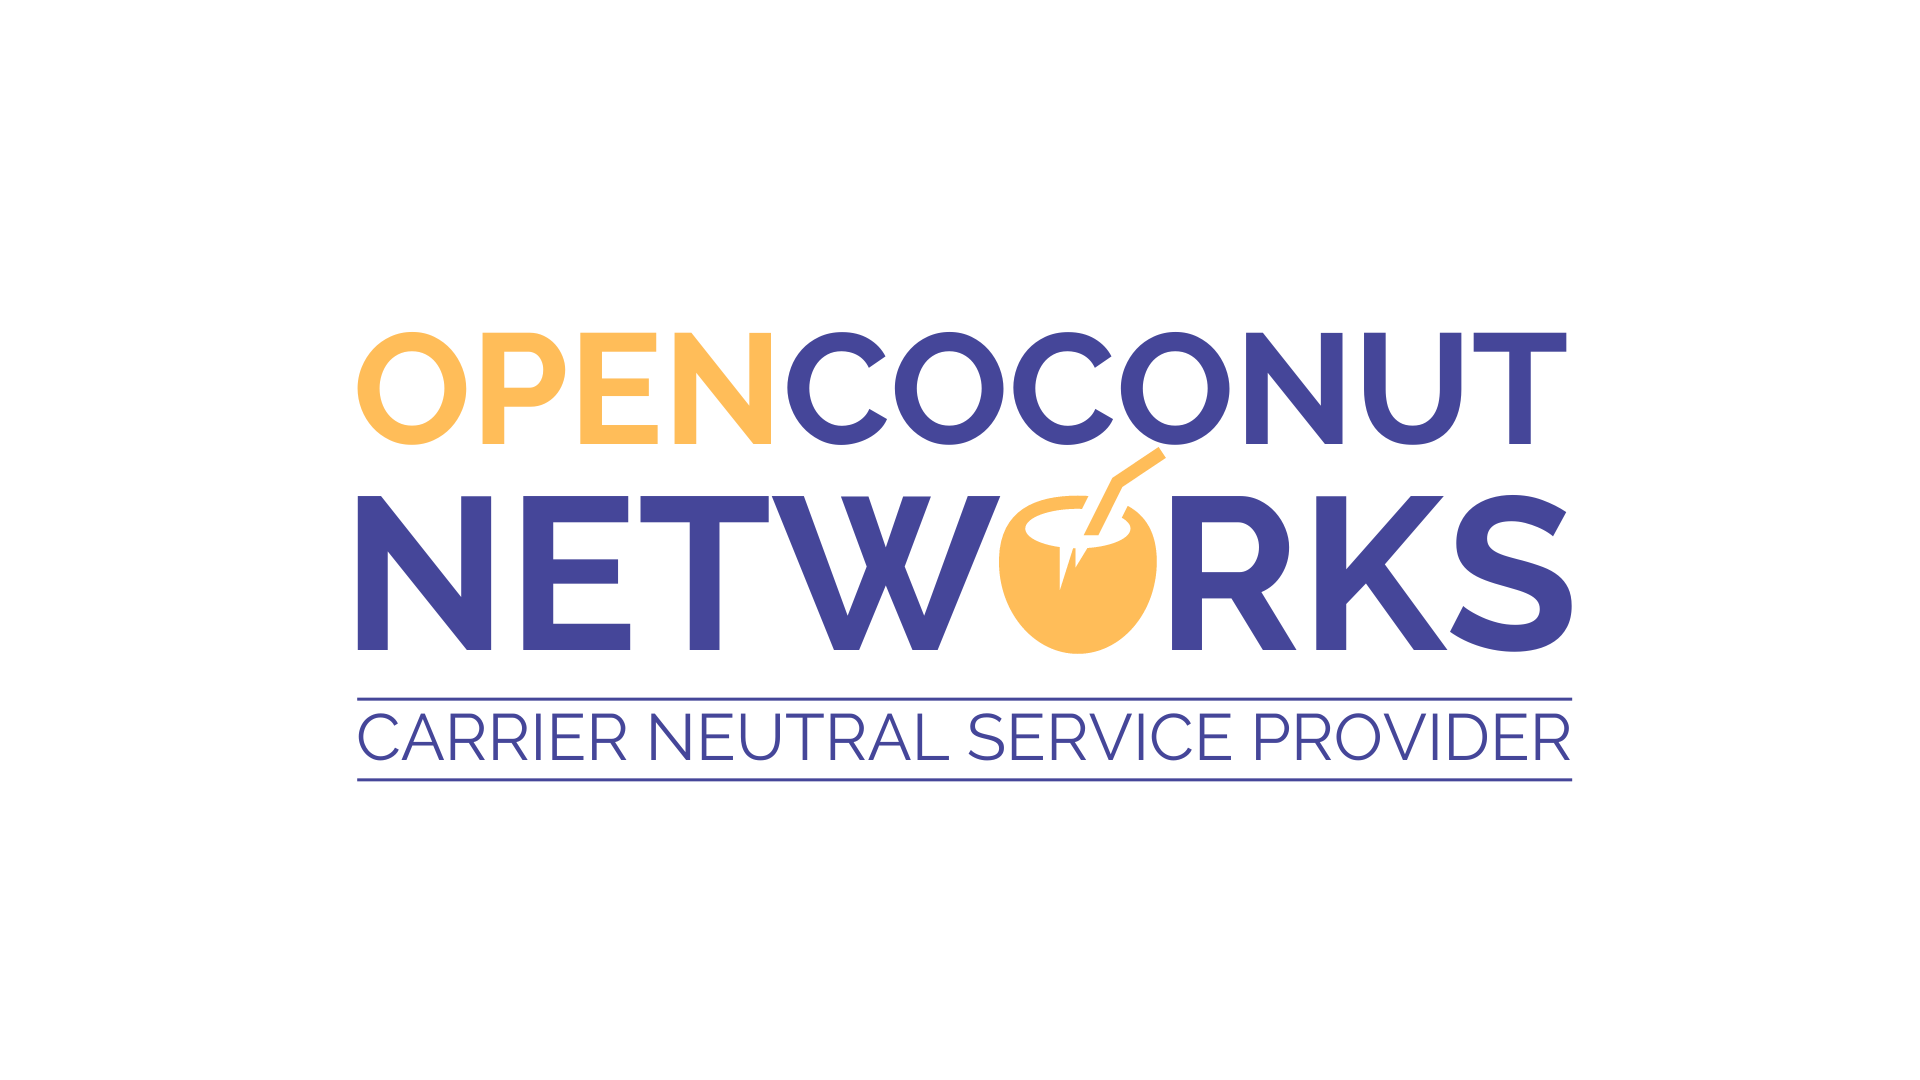 OPEN COCONUT NETWORKS